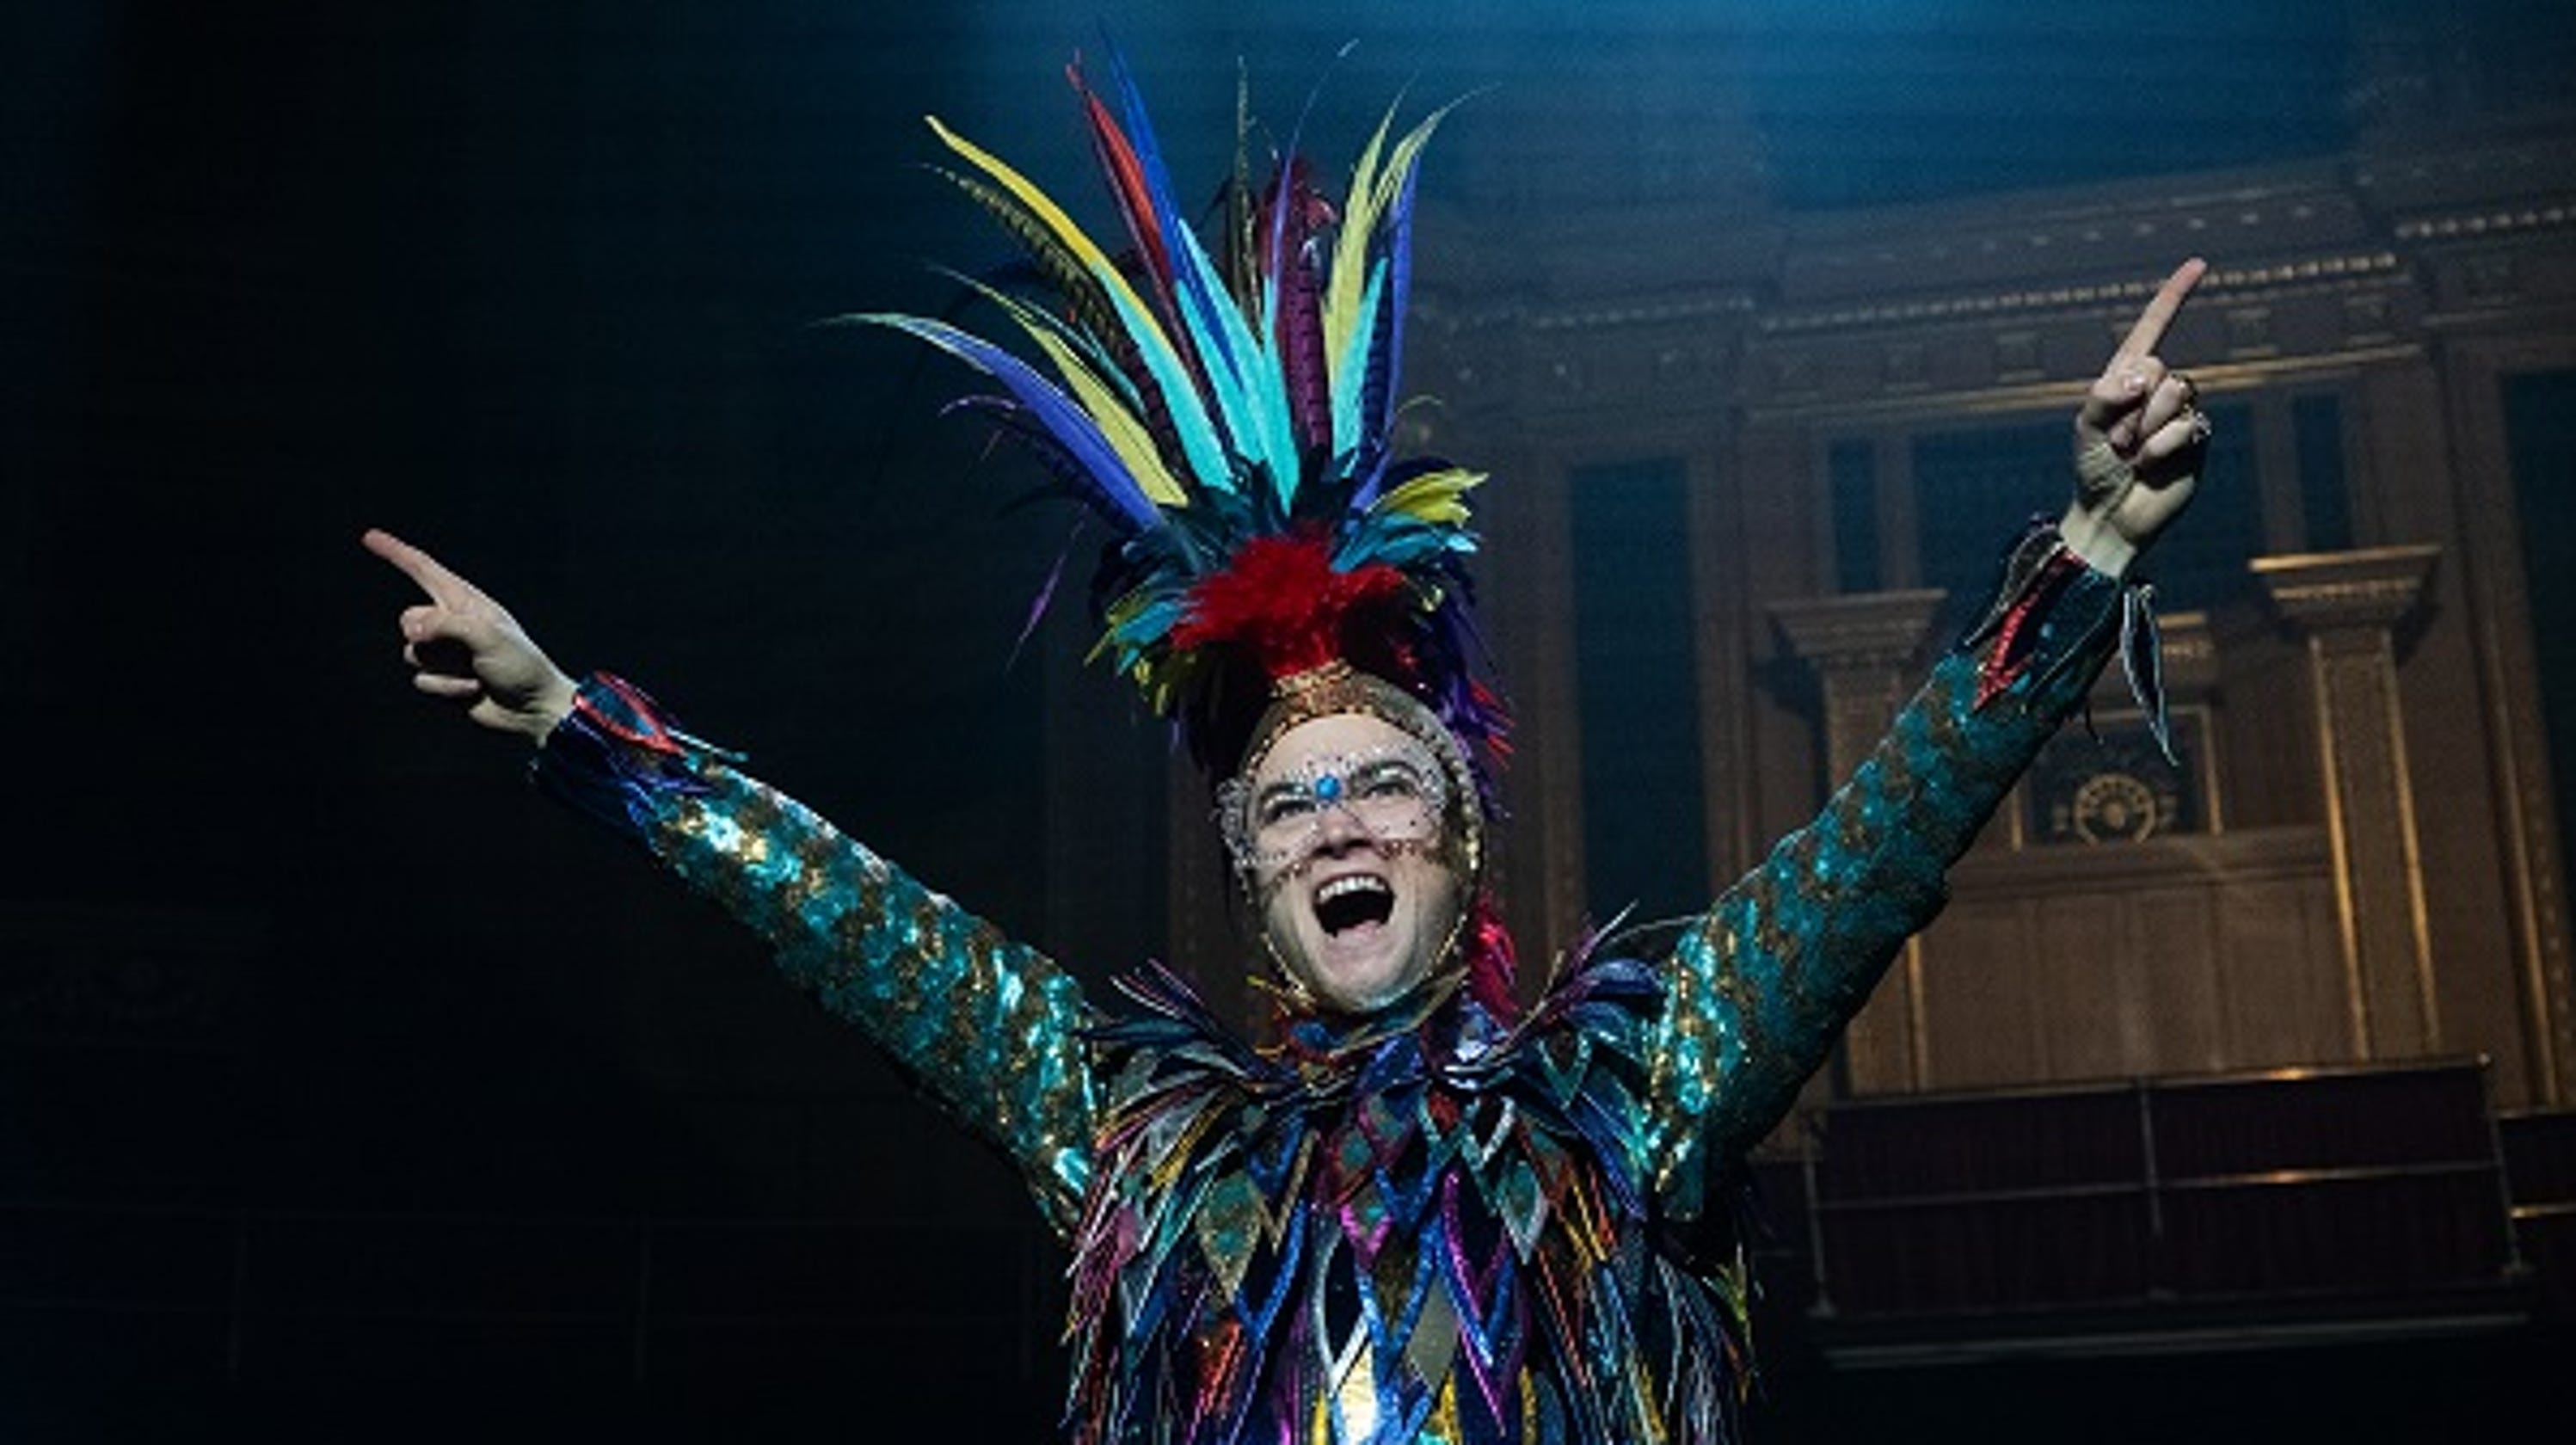 'Rocketman': Elton John's outrageous outfits are the shining stars2995 x 1680